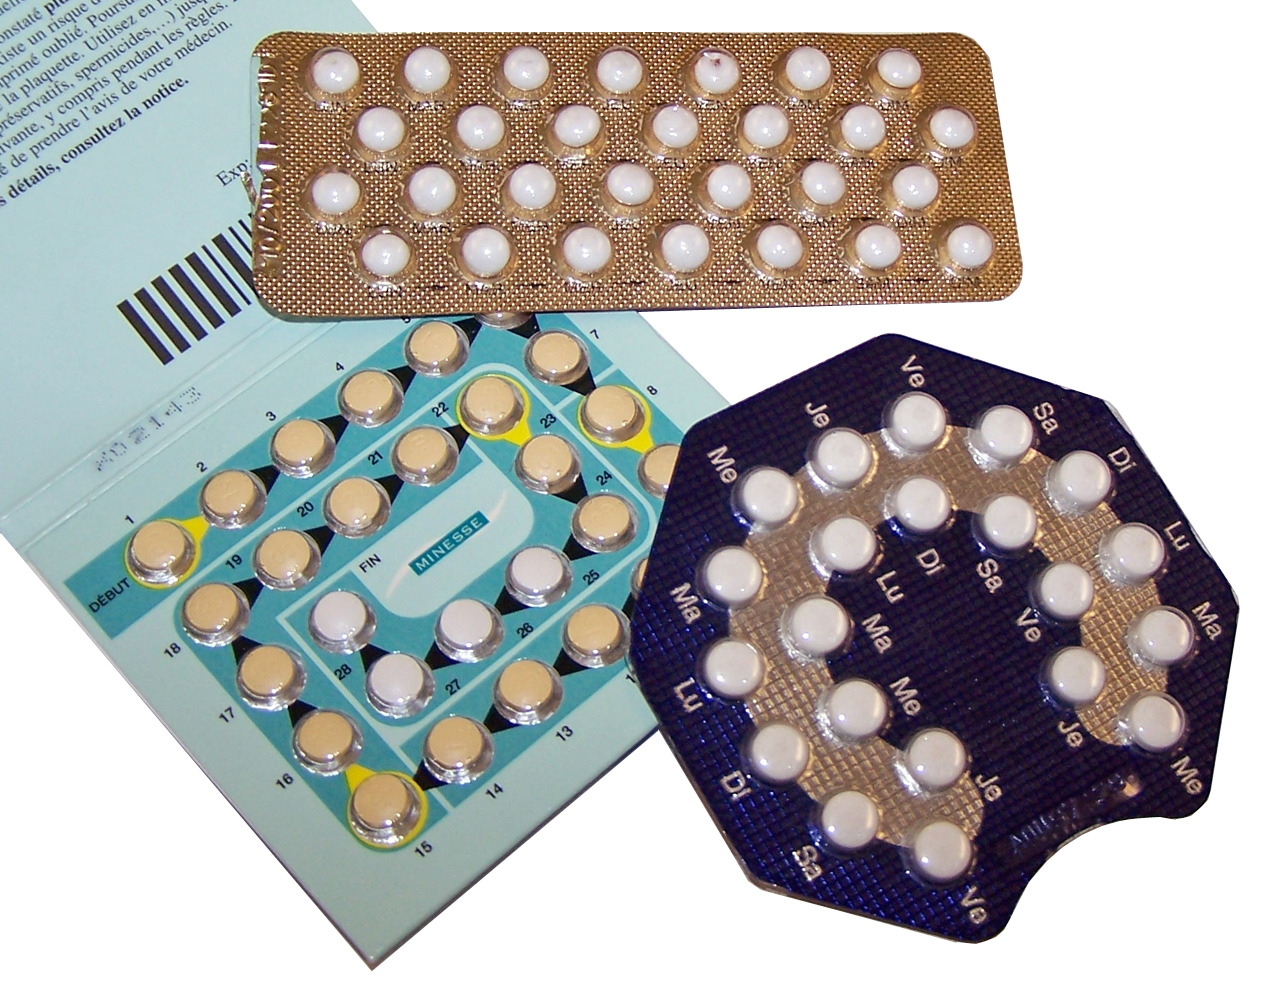 1960: The First Contraceptive Pill Sparked Criticism